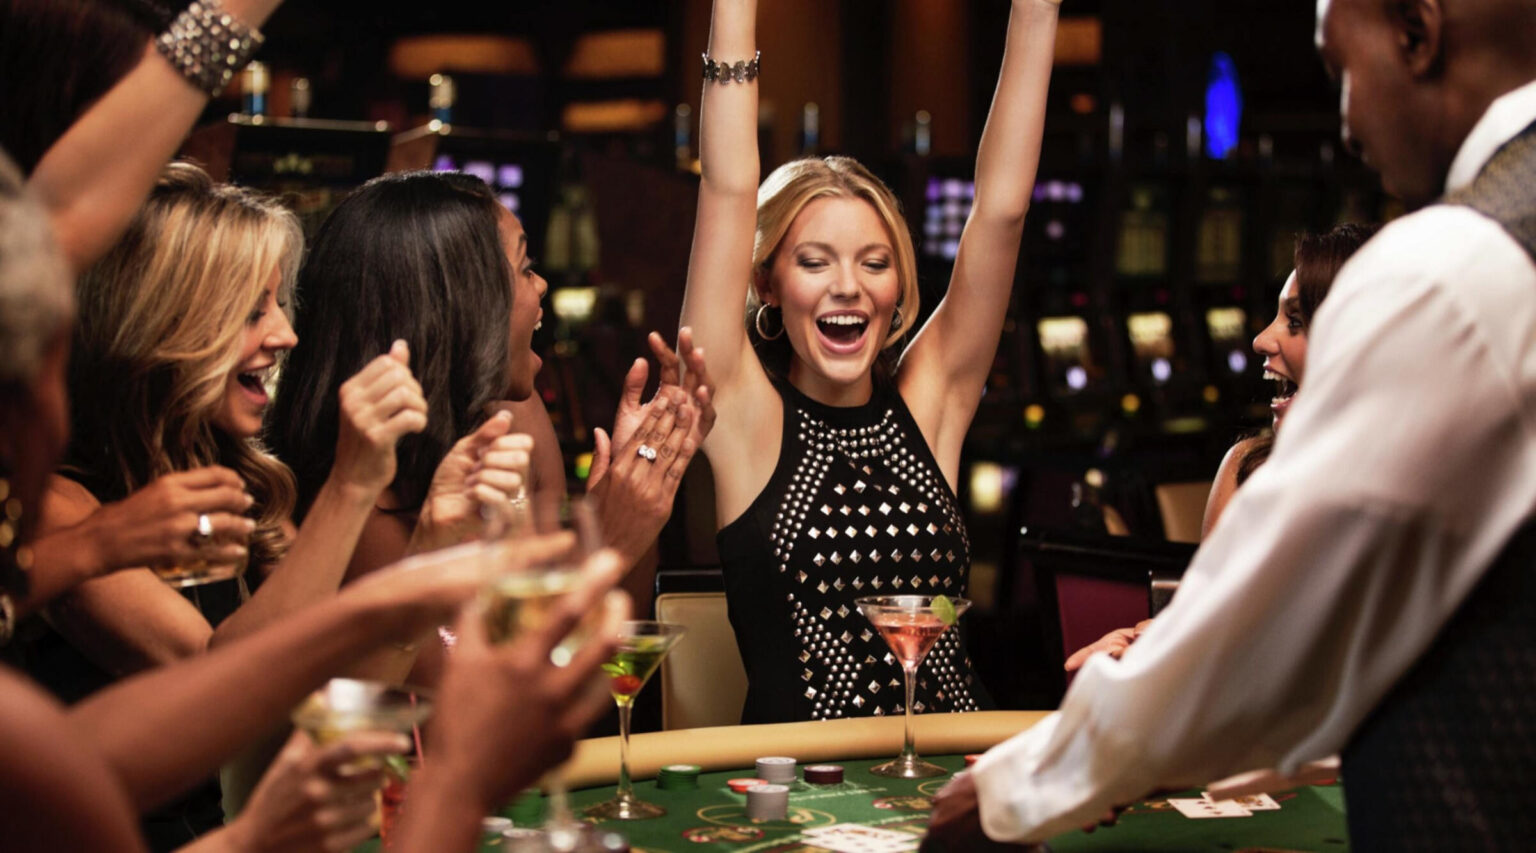 For new players, winning at casinos can seem like a pipedream. we break down how you can not only win, but win big every time with these tips!